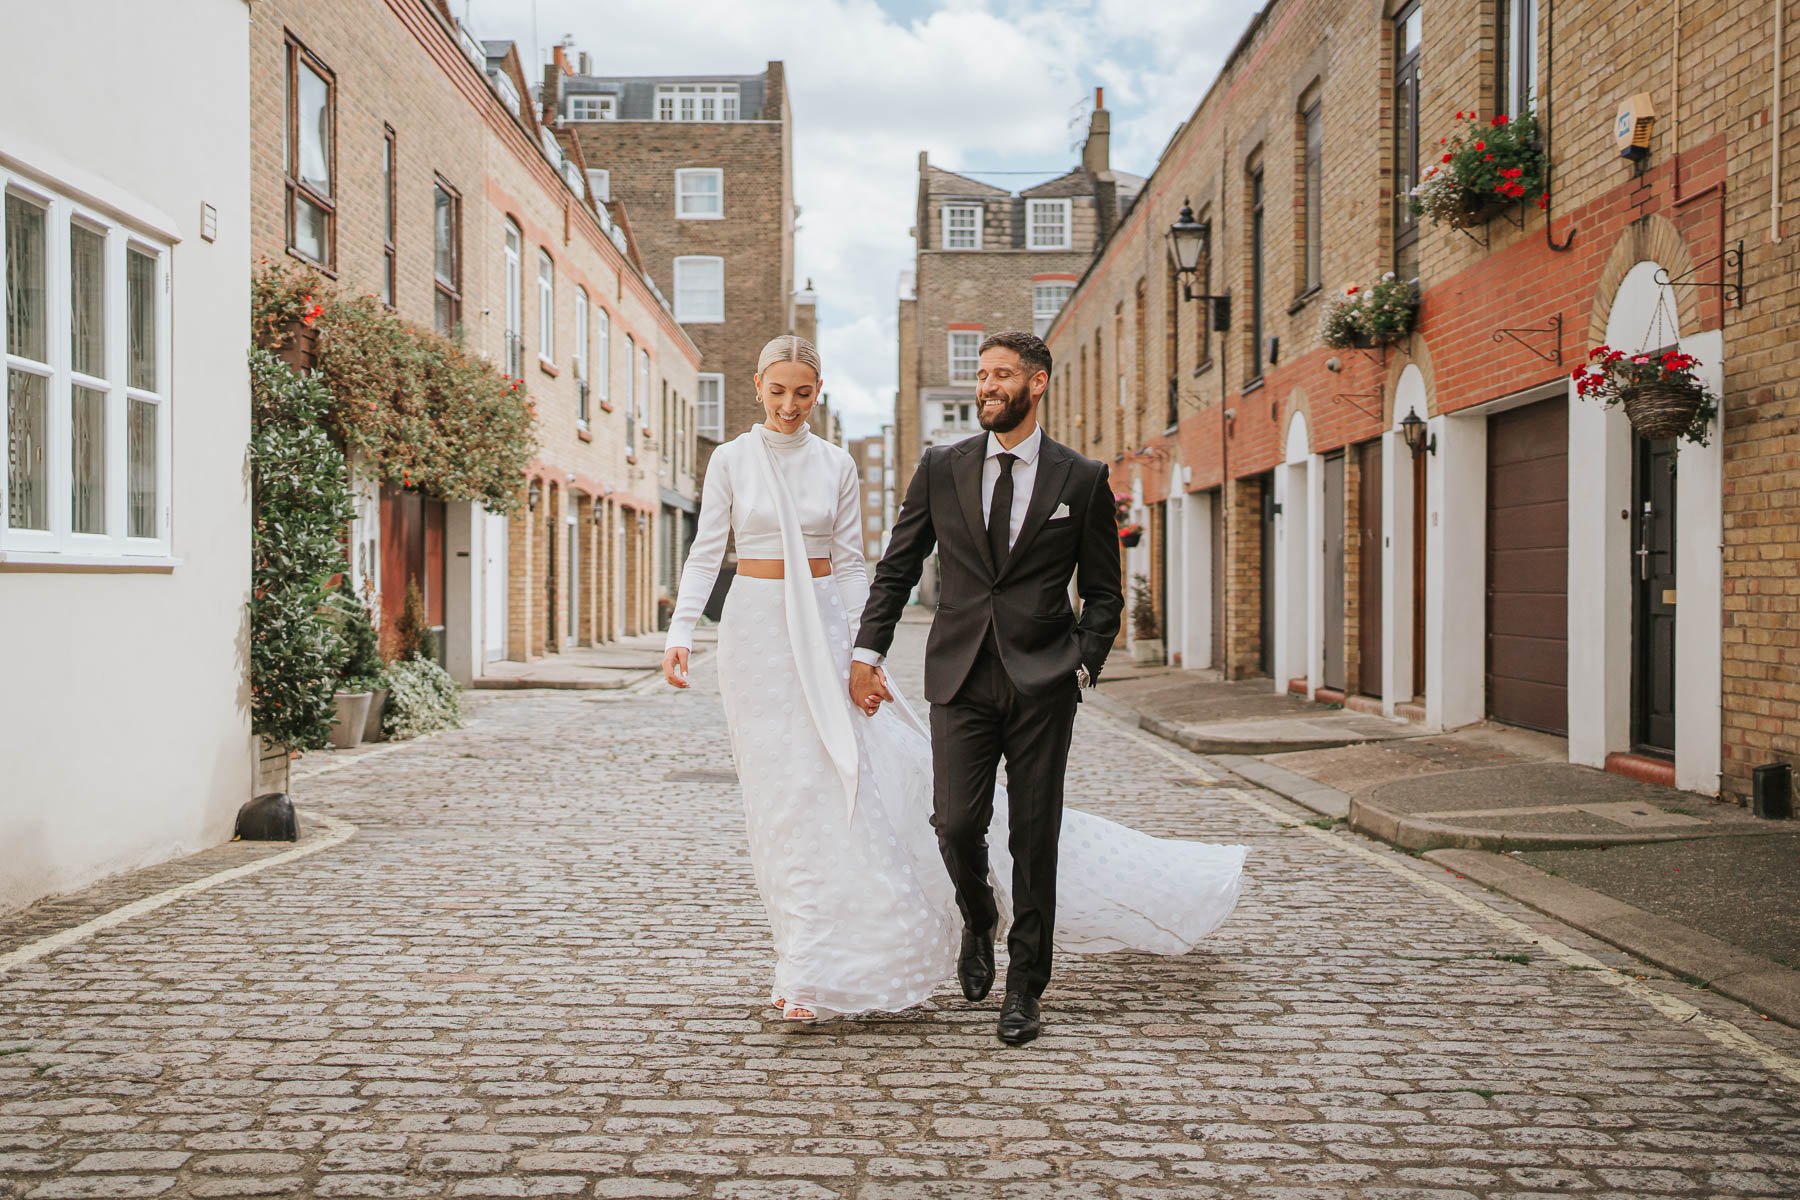  Bride and groom walk towards photographer arm in arm down cobbled street behind Marylebone Town Hall.  